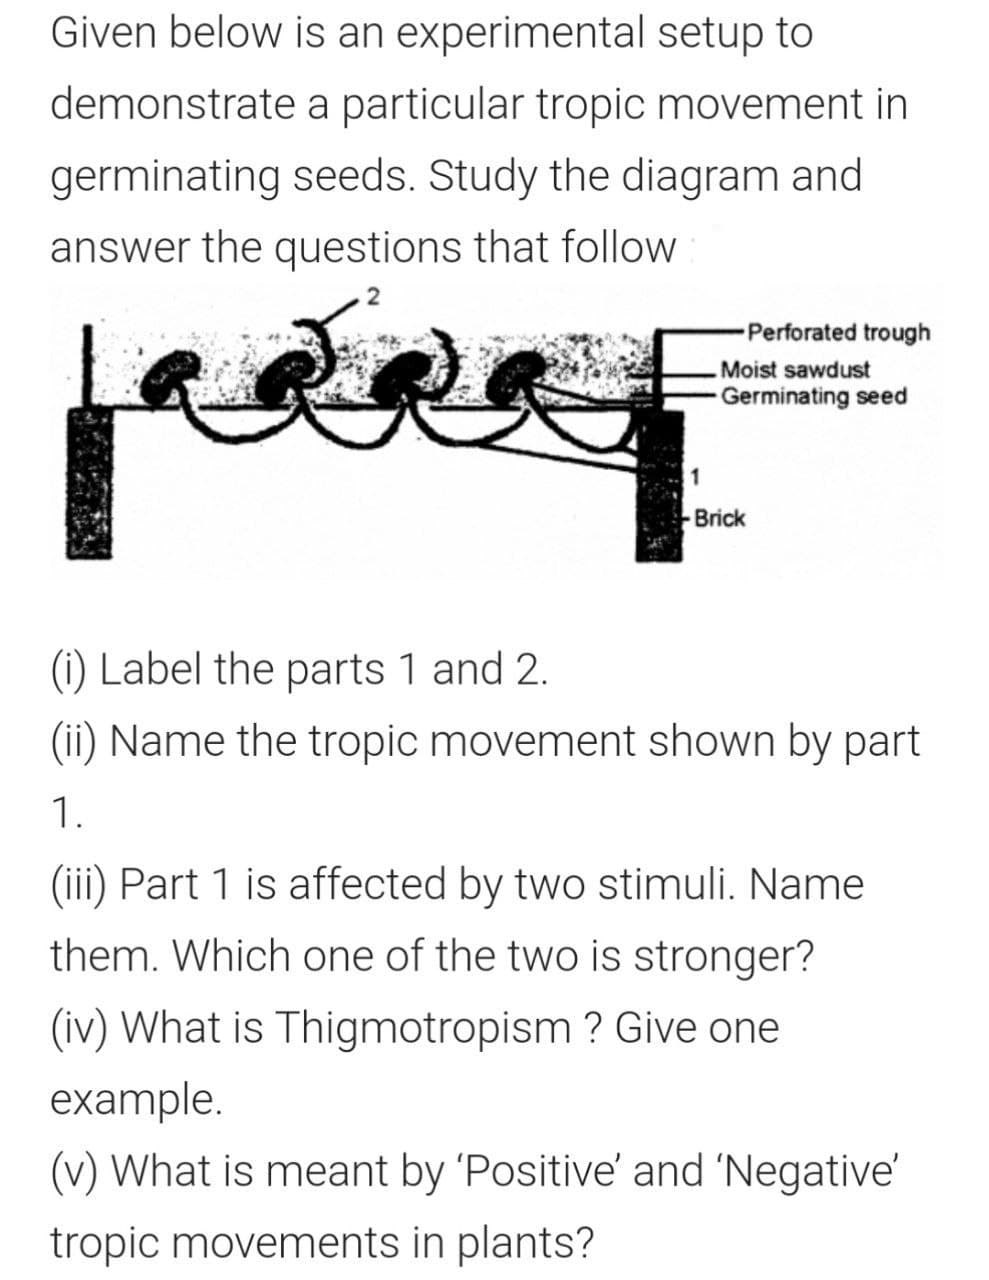 Given below is an experimental setup to
demonstrate a particular tropic movement in
germinating seeds. Study the diagram and
answer the questions that follow
Perforated trough
Moist sawdust
- Germinating seed
-Brick
(i) Label the parts 1 and 2.
(ii) Name the tropic movement shown by part
1.
(iii) Part 1 is affected by two stimuli. Name
them. Which one of the two is stronger?
(iv) What is Thigmotropism ? Give one
example.
(v) What is meant by 'Positive' and 'Negative'
tropic movements in plants?
